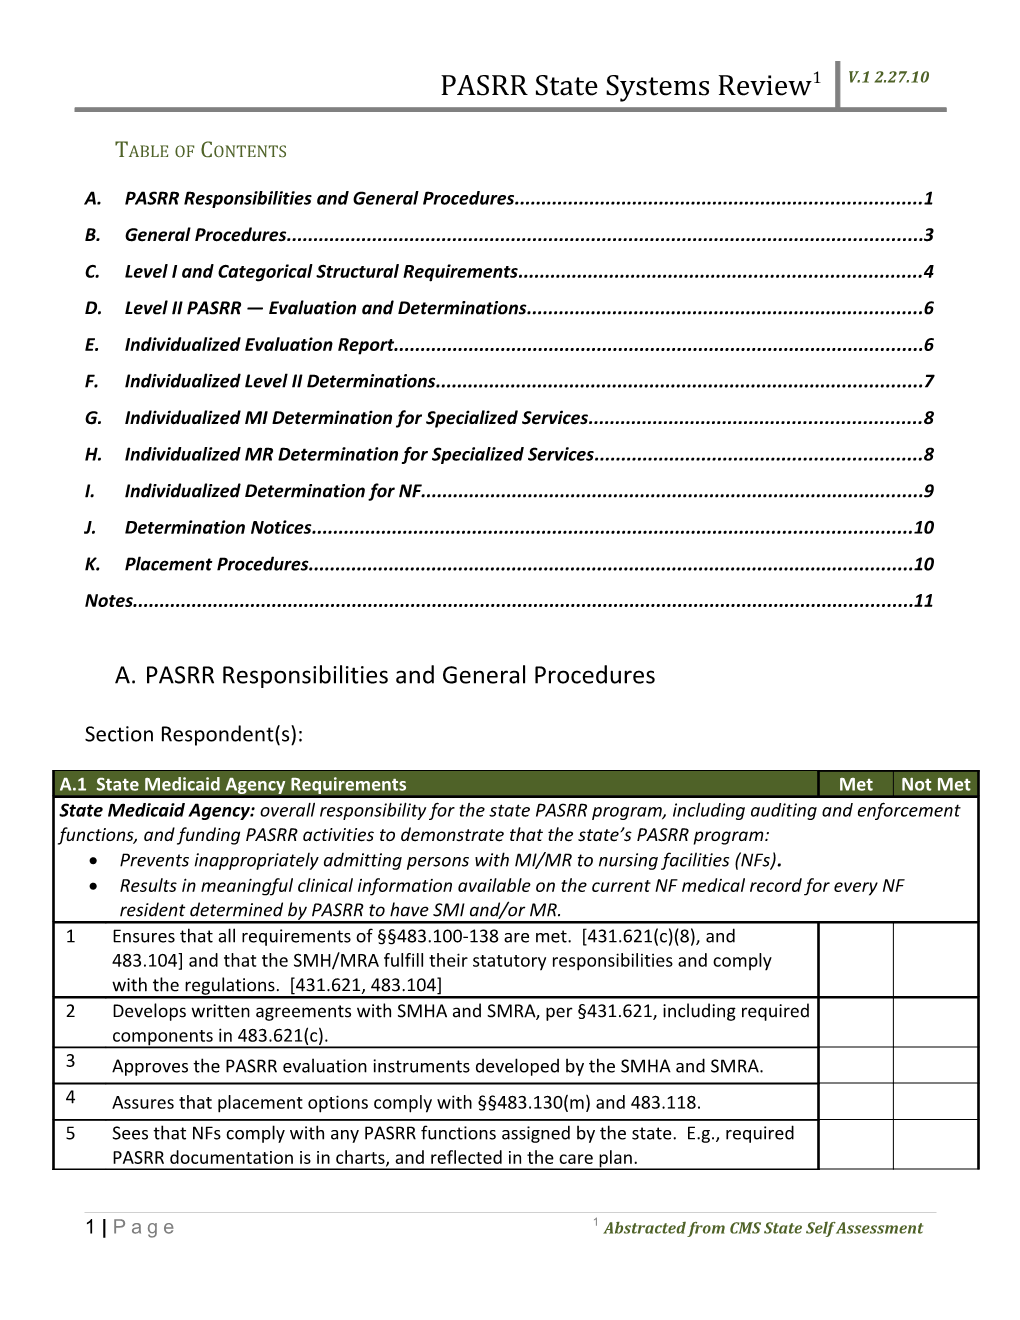 A.PASRR Responsibilities and General Procedures